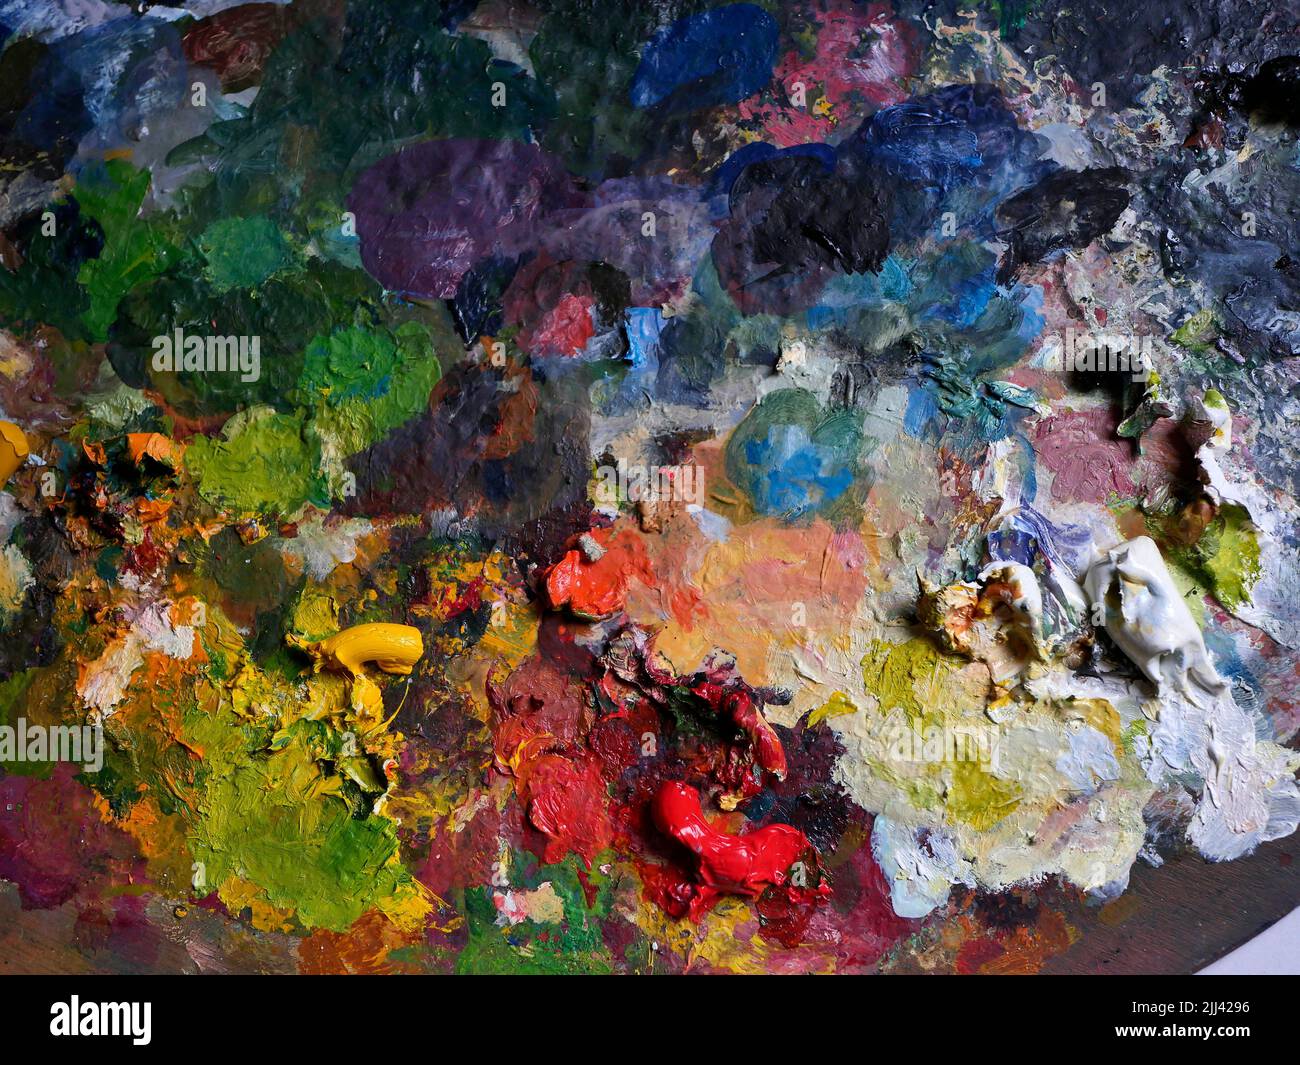 AJAXNETPHOTO. 2021. WORTHING, ENGLAND. - COLOUR PALETTE - A PAINTER'S WOODEN PALETTE COVERED IN A MESS OF OIL-PAINT COLOURS.PHOTO:JONATHAN EASTLAND/AJAX REF:GX9 211209 2464 2 Stock Photo